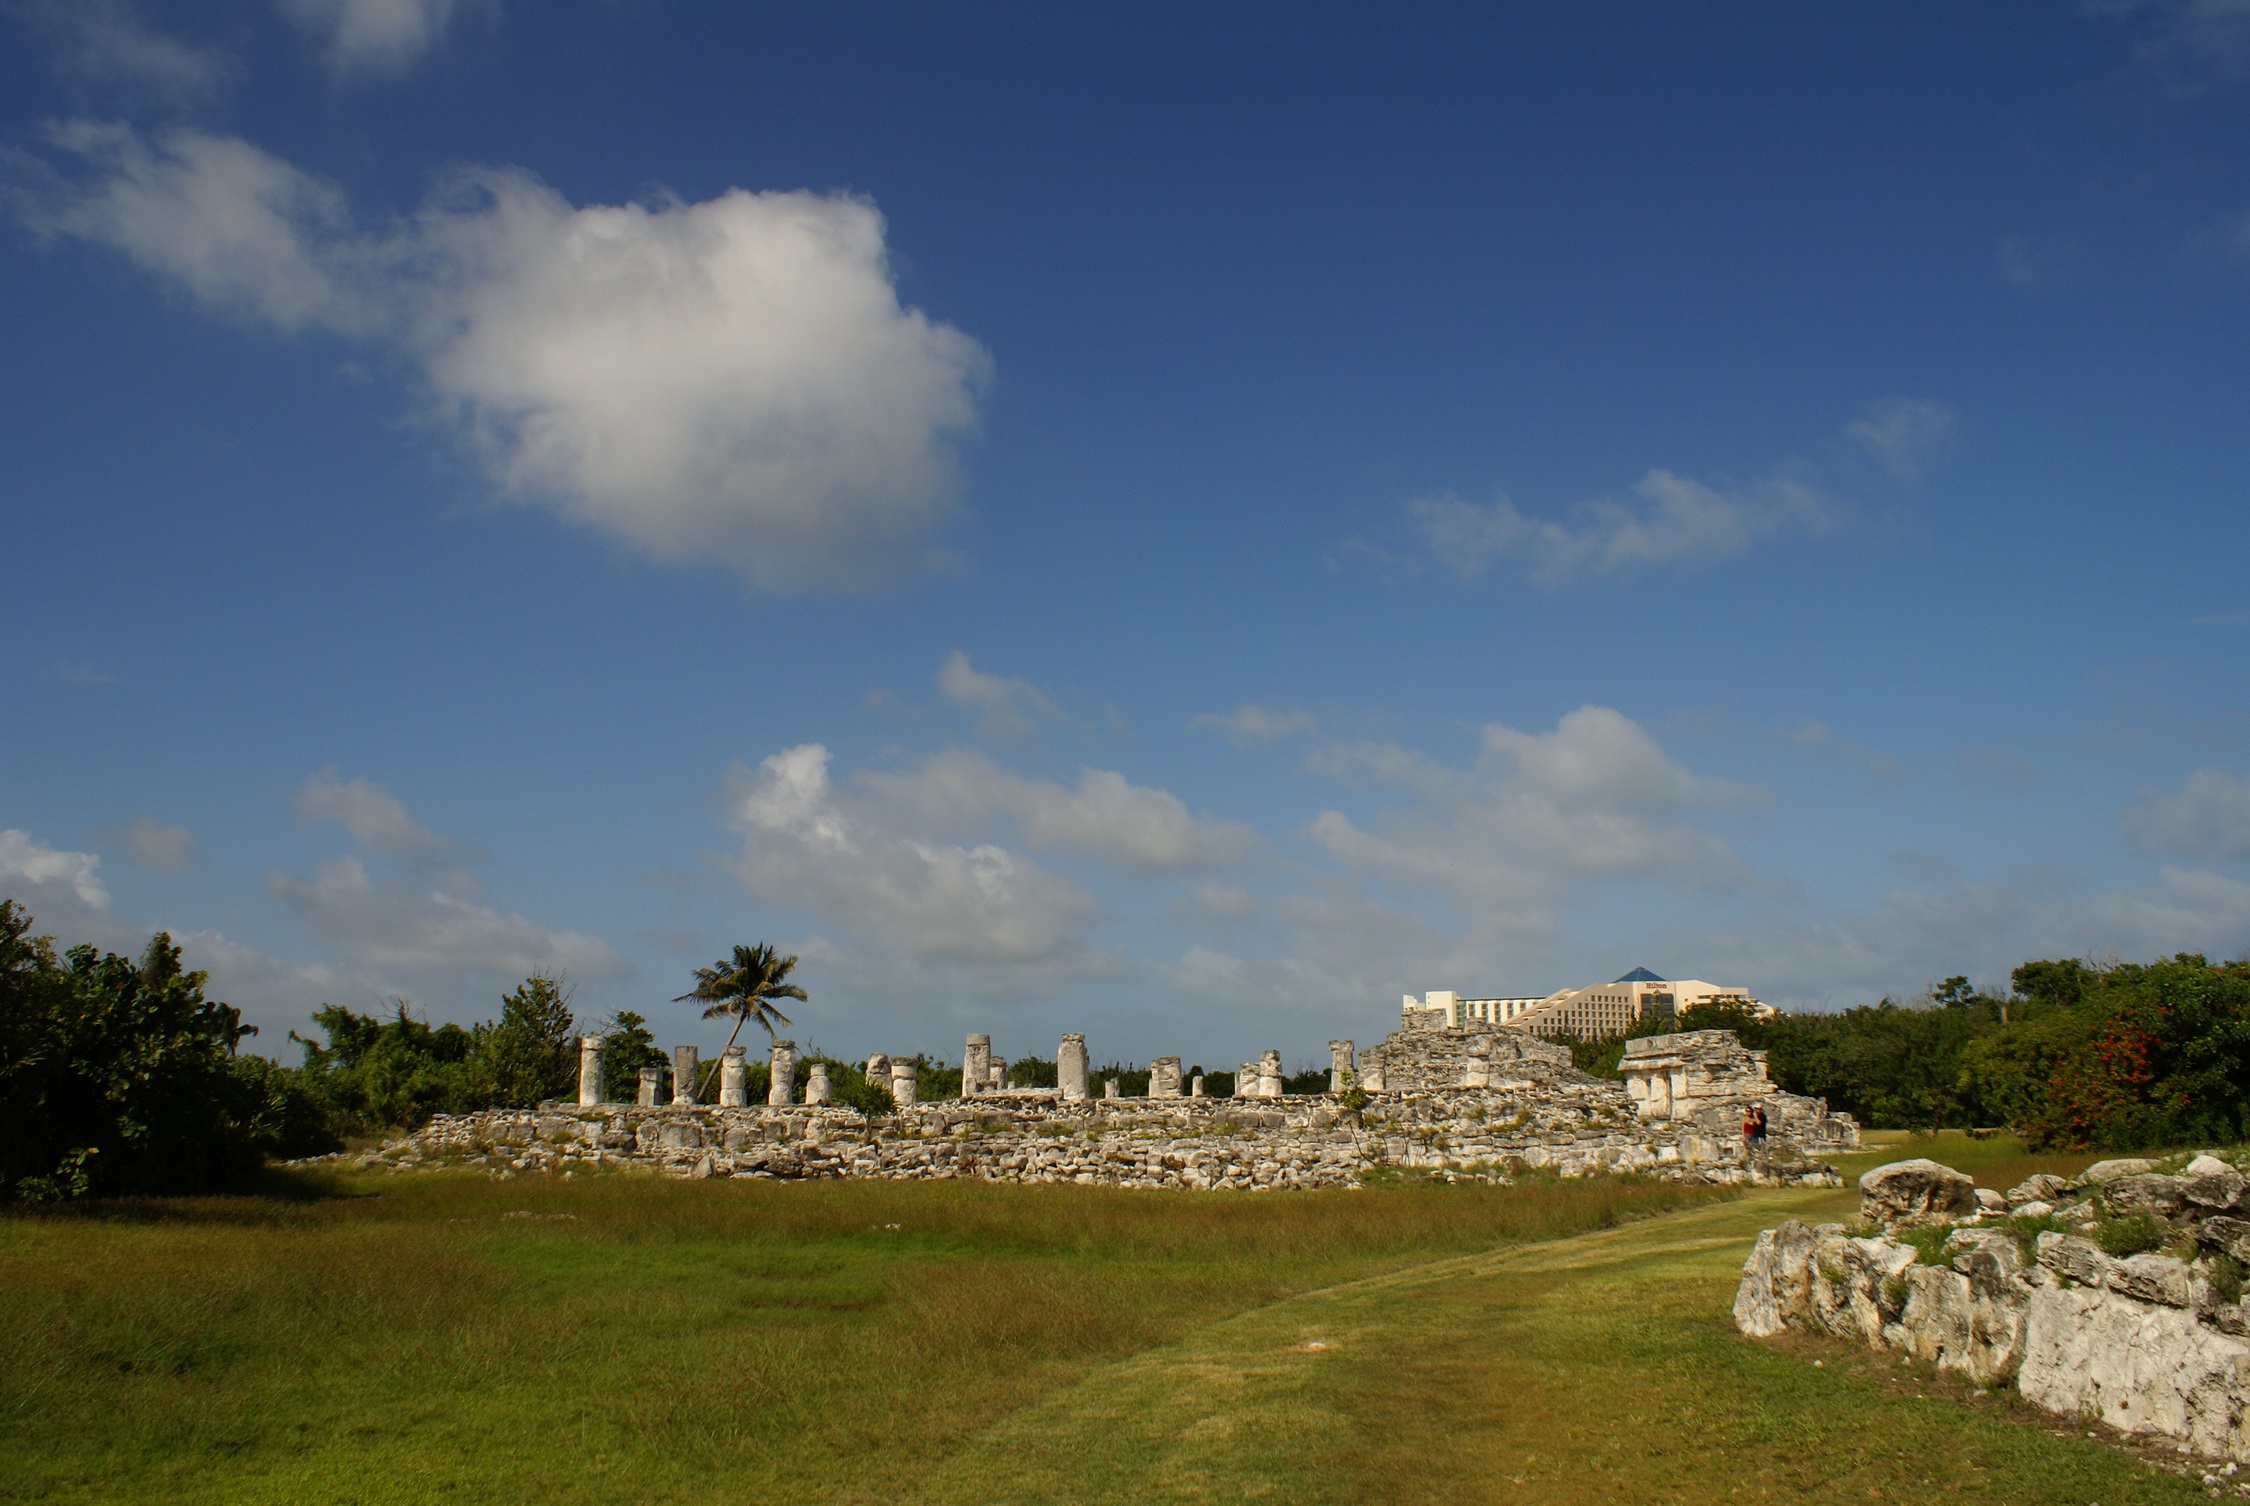 El Rey Archaeological Structure type palace with columns. This kind of structure was common in the east coast of the peninsula of Yucatan during AD 1200-1520. Credits: Allan Ortega-Muñoz, CC0